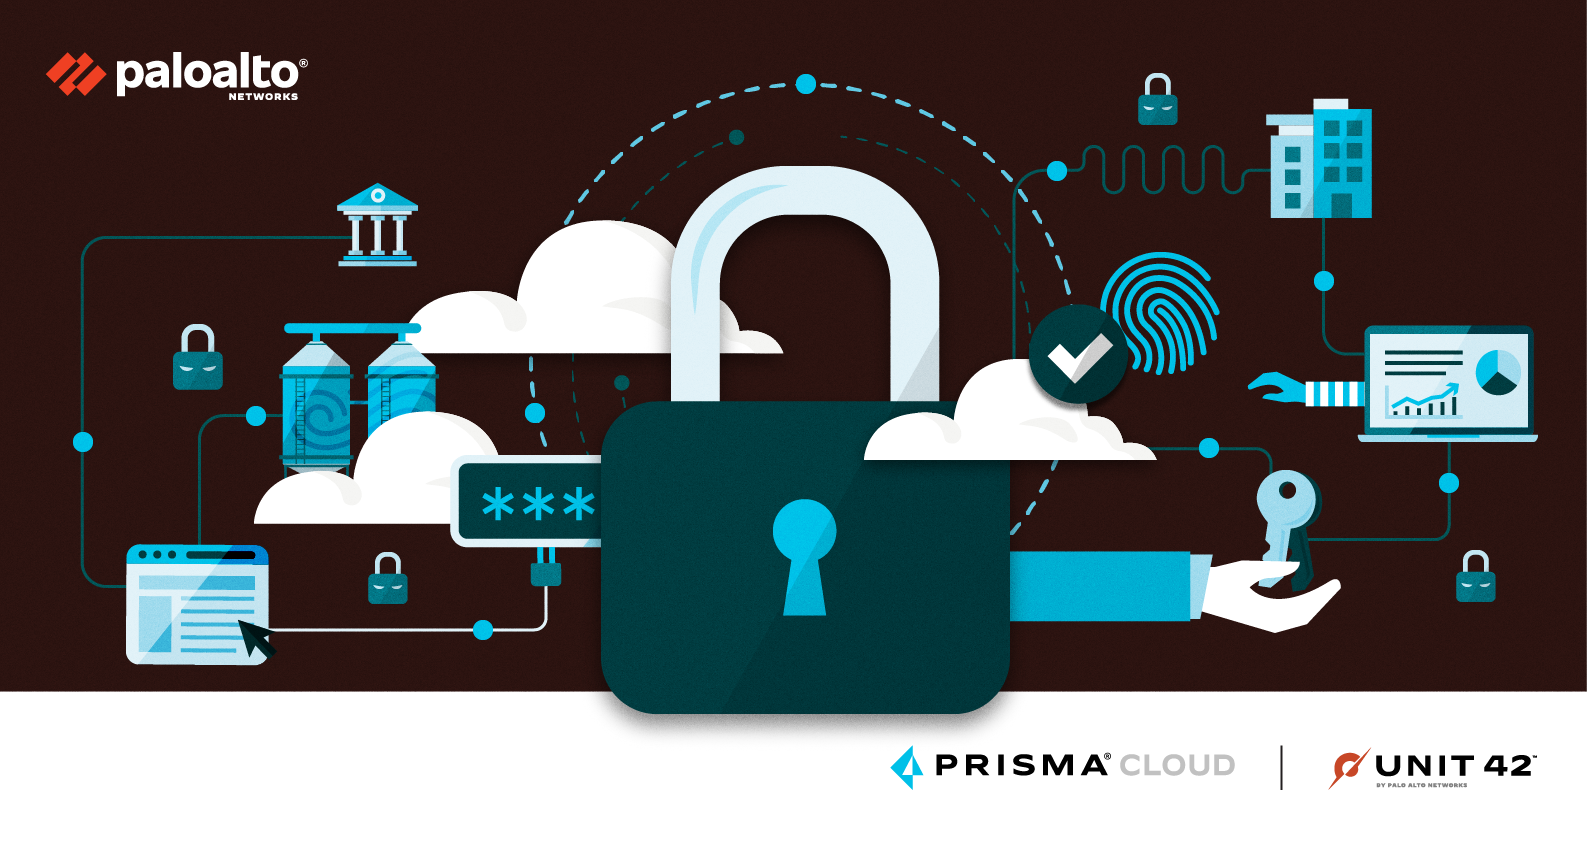 A graphic element with the Unit 42 and Prisma Cloud logos